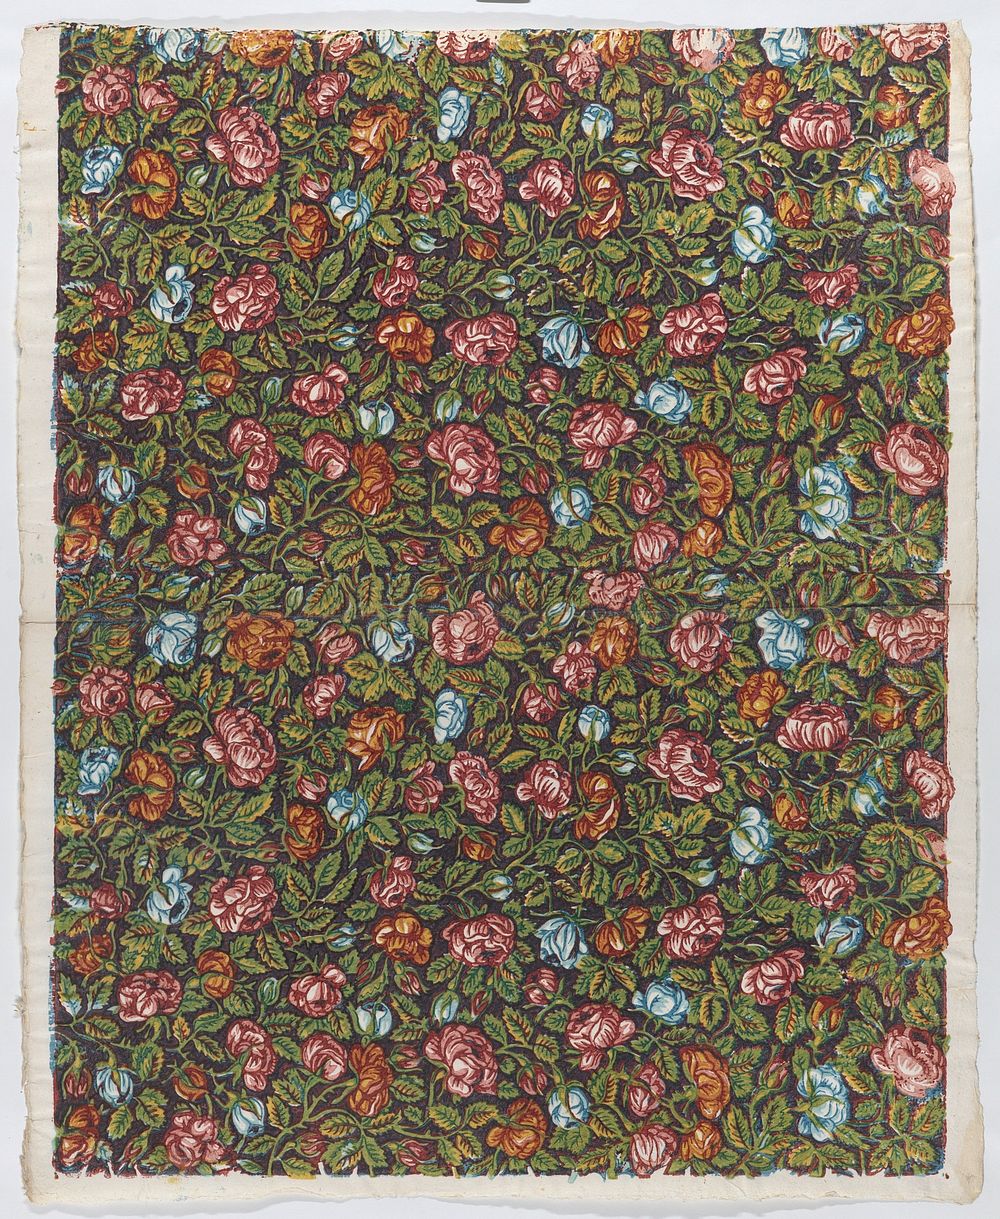 Sheet with overall floral pattern on a dark background